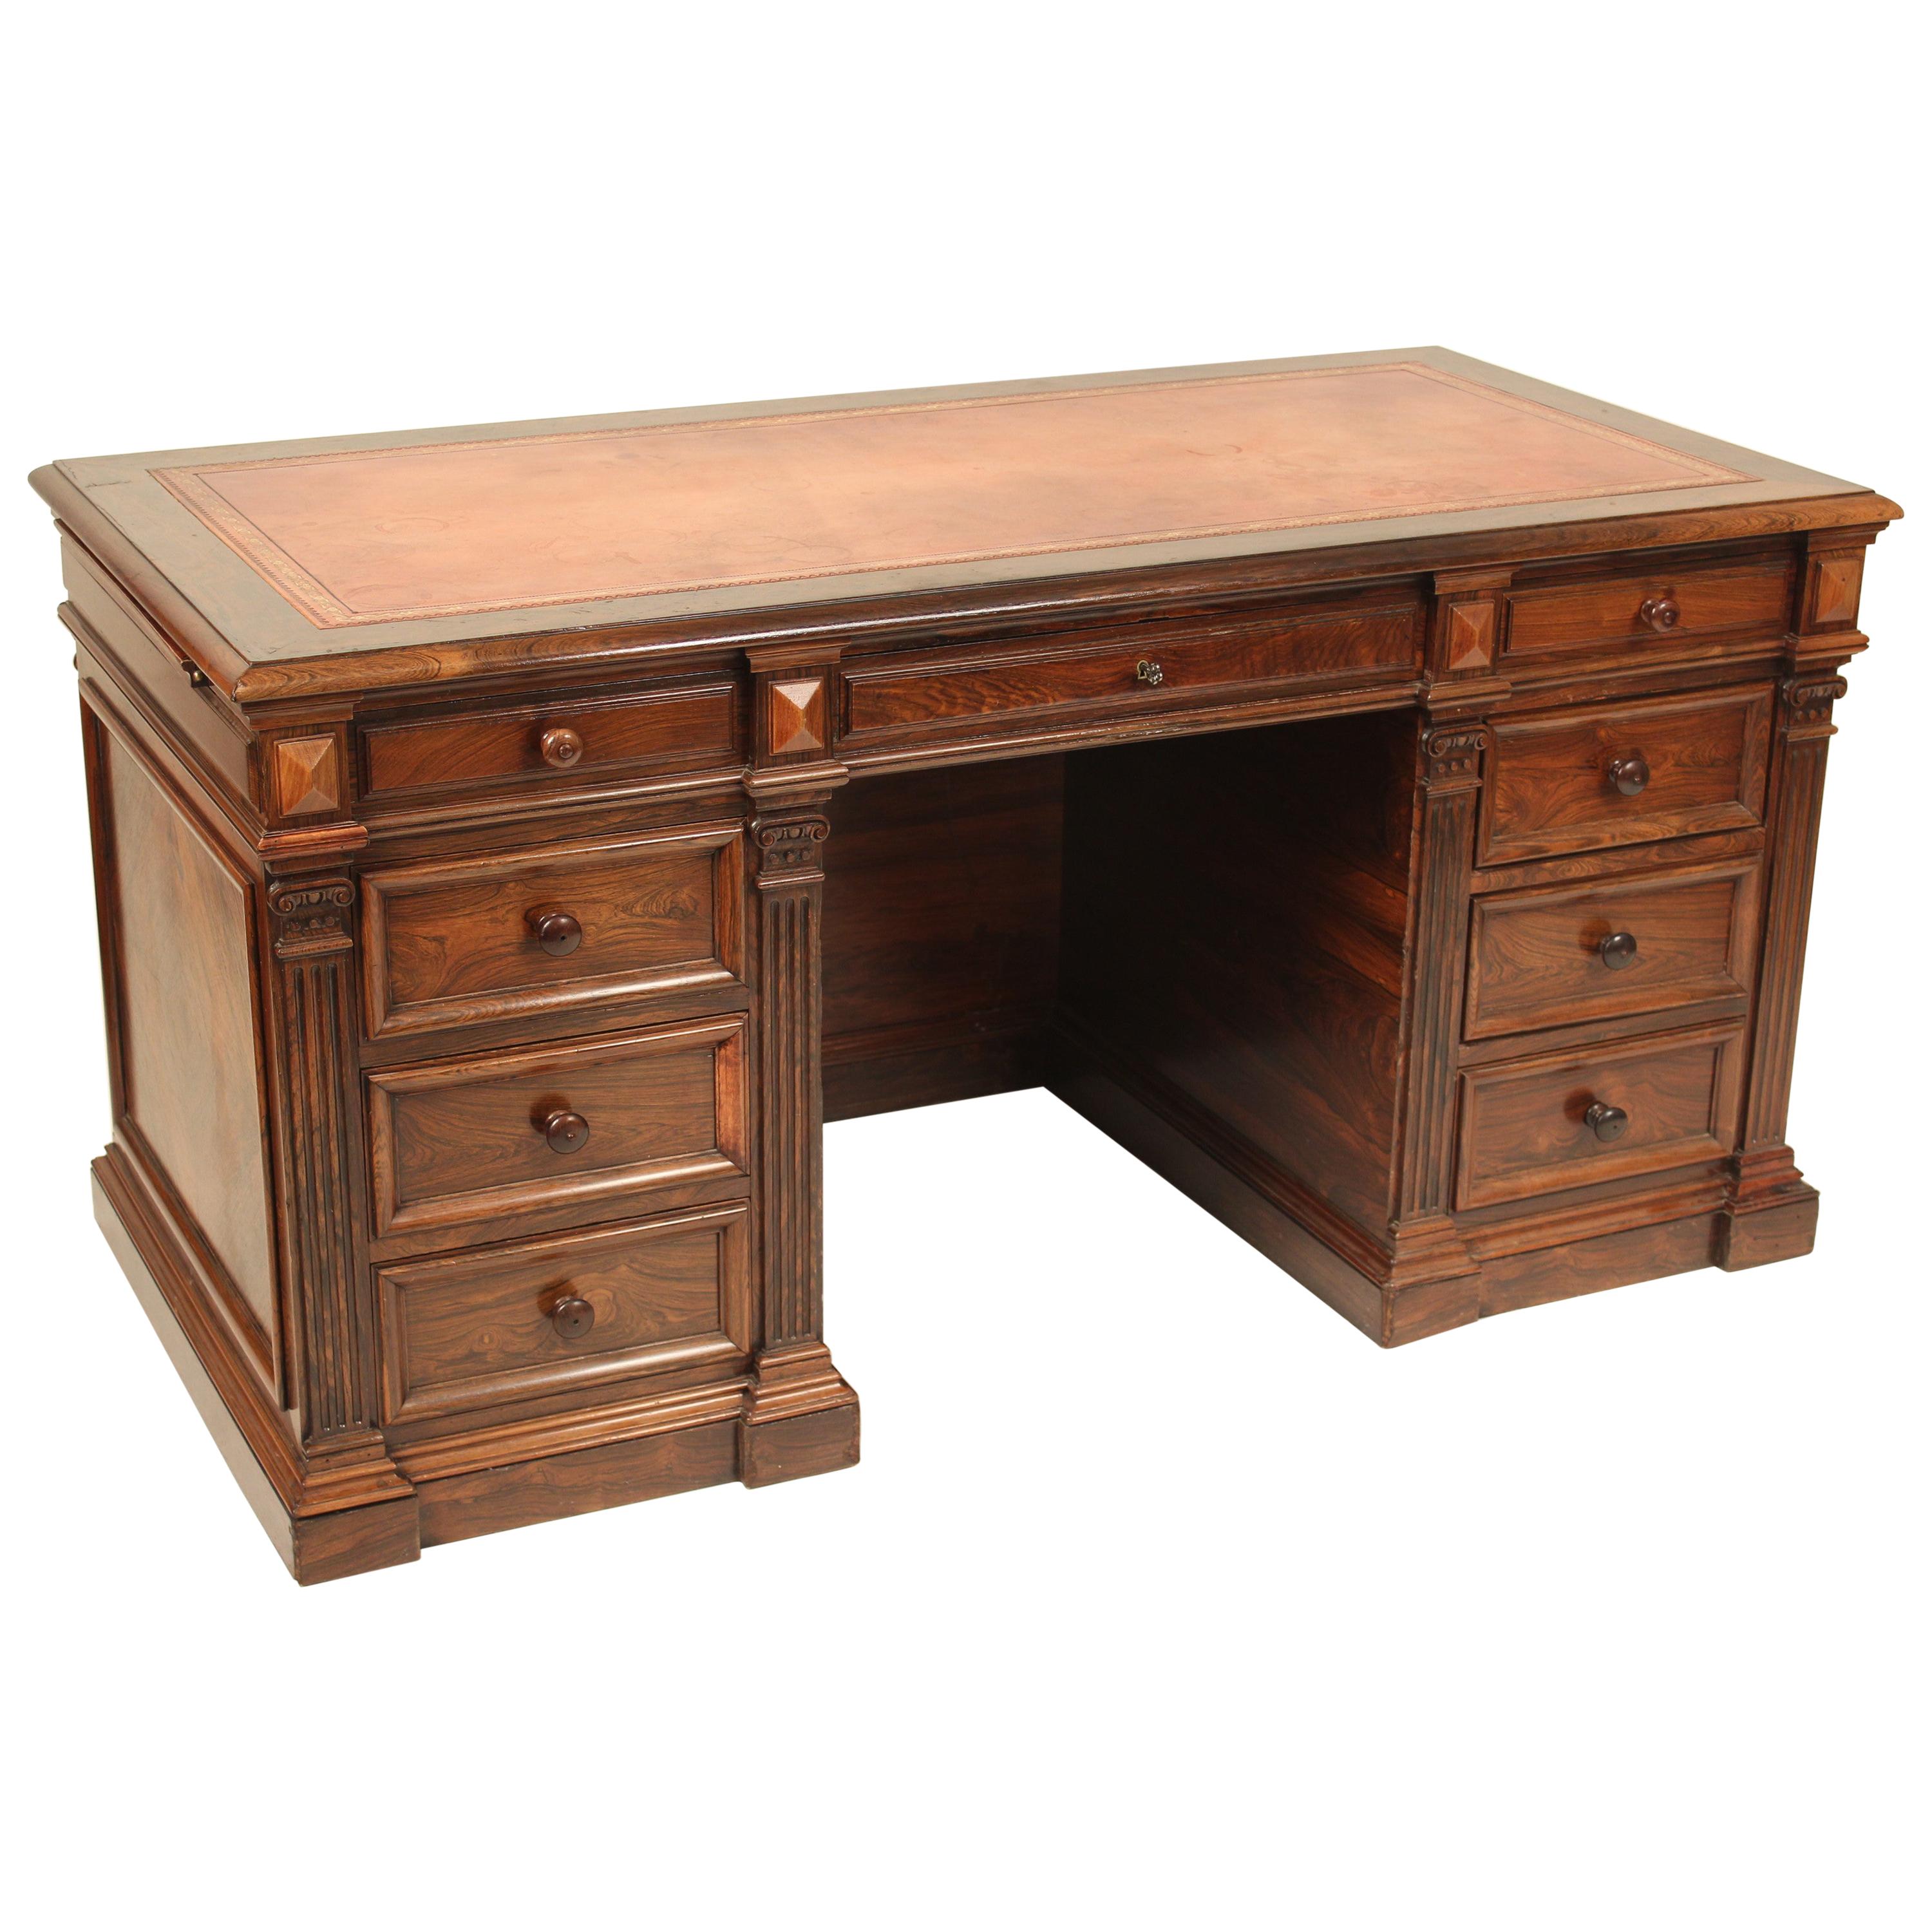 English Regency Style Rosewood Leather Top Desk